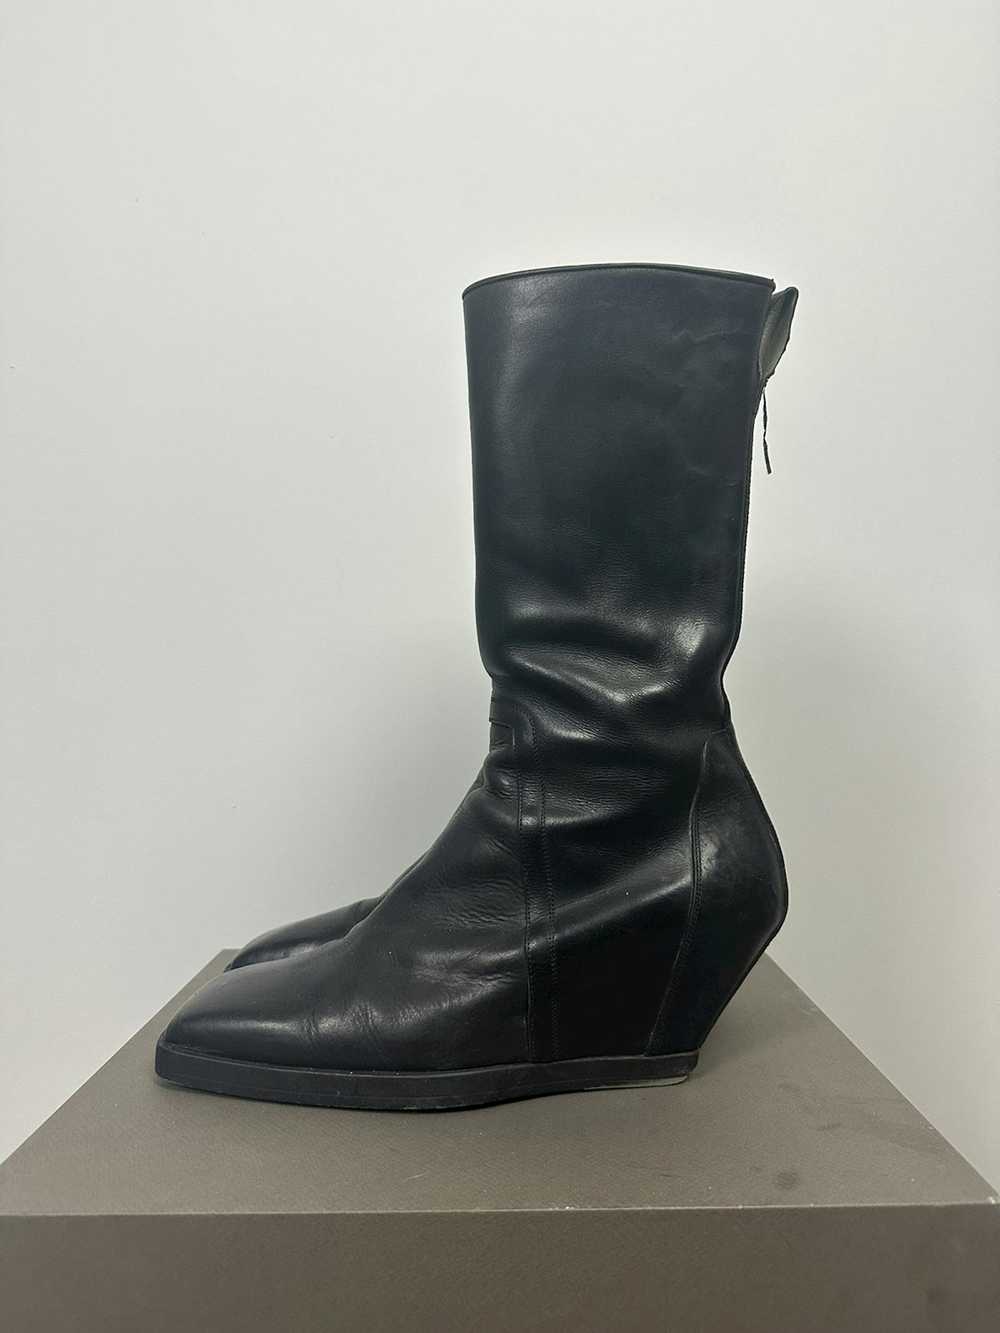 Rick Owens SS19 ‘BABEL’ Square Toe Wedge Boots - image 2